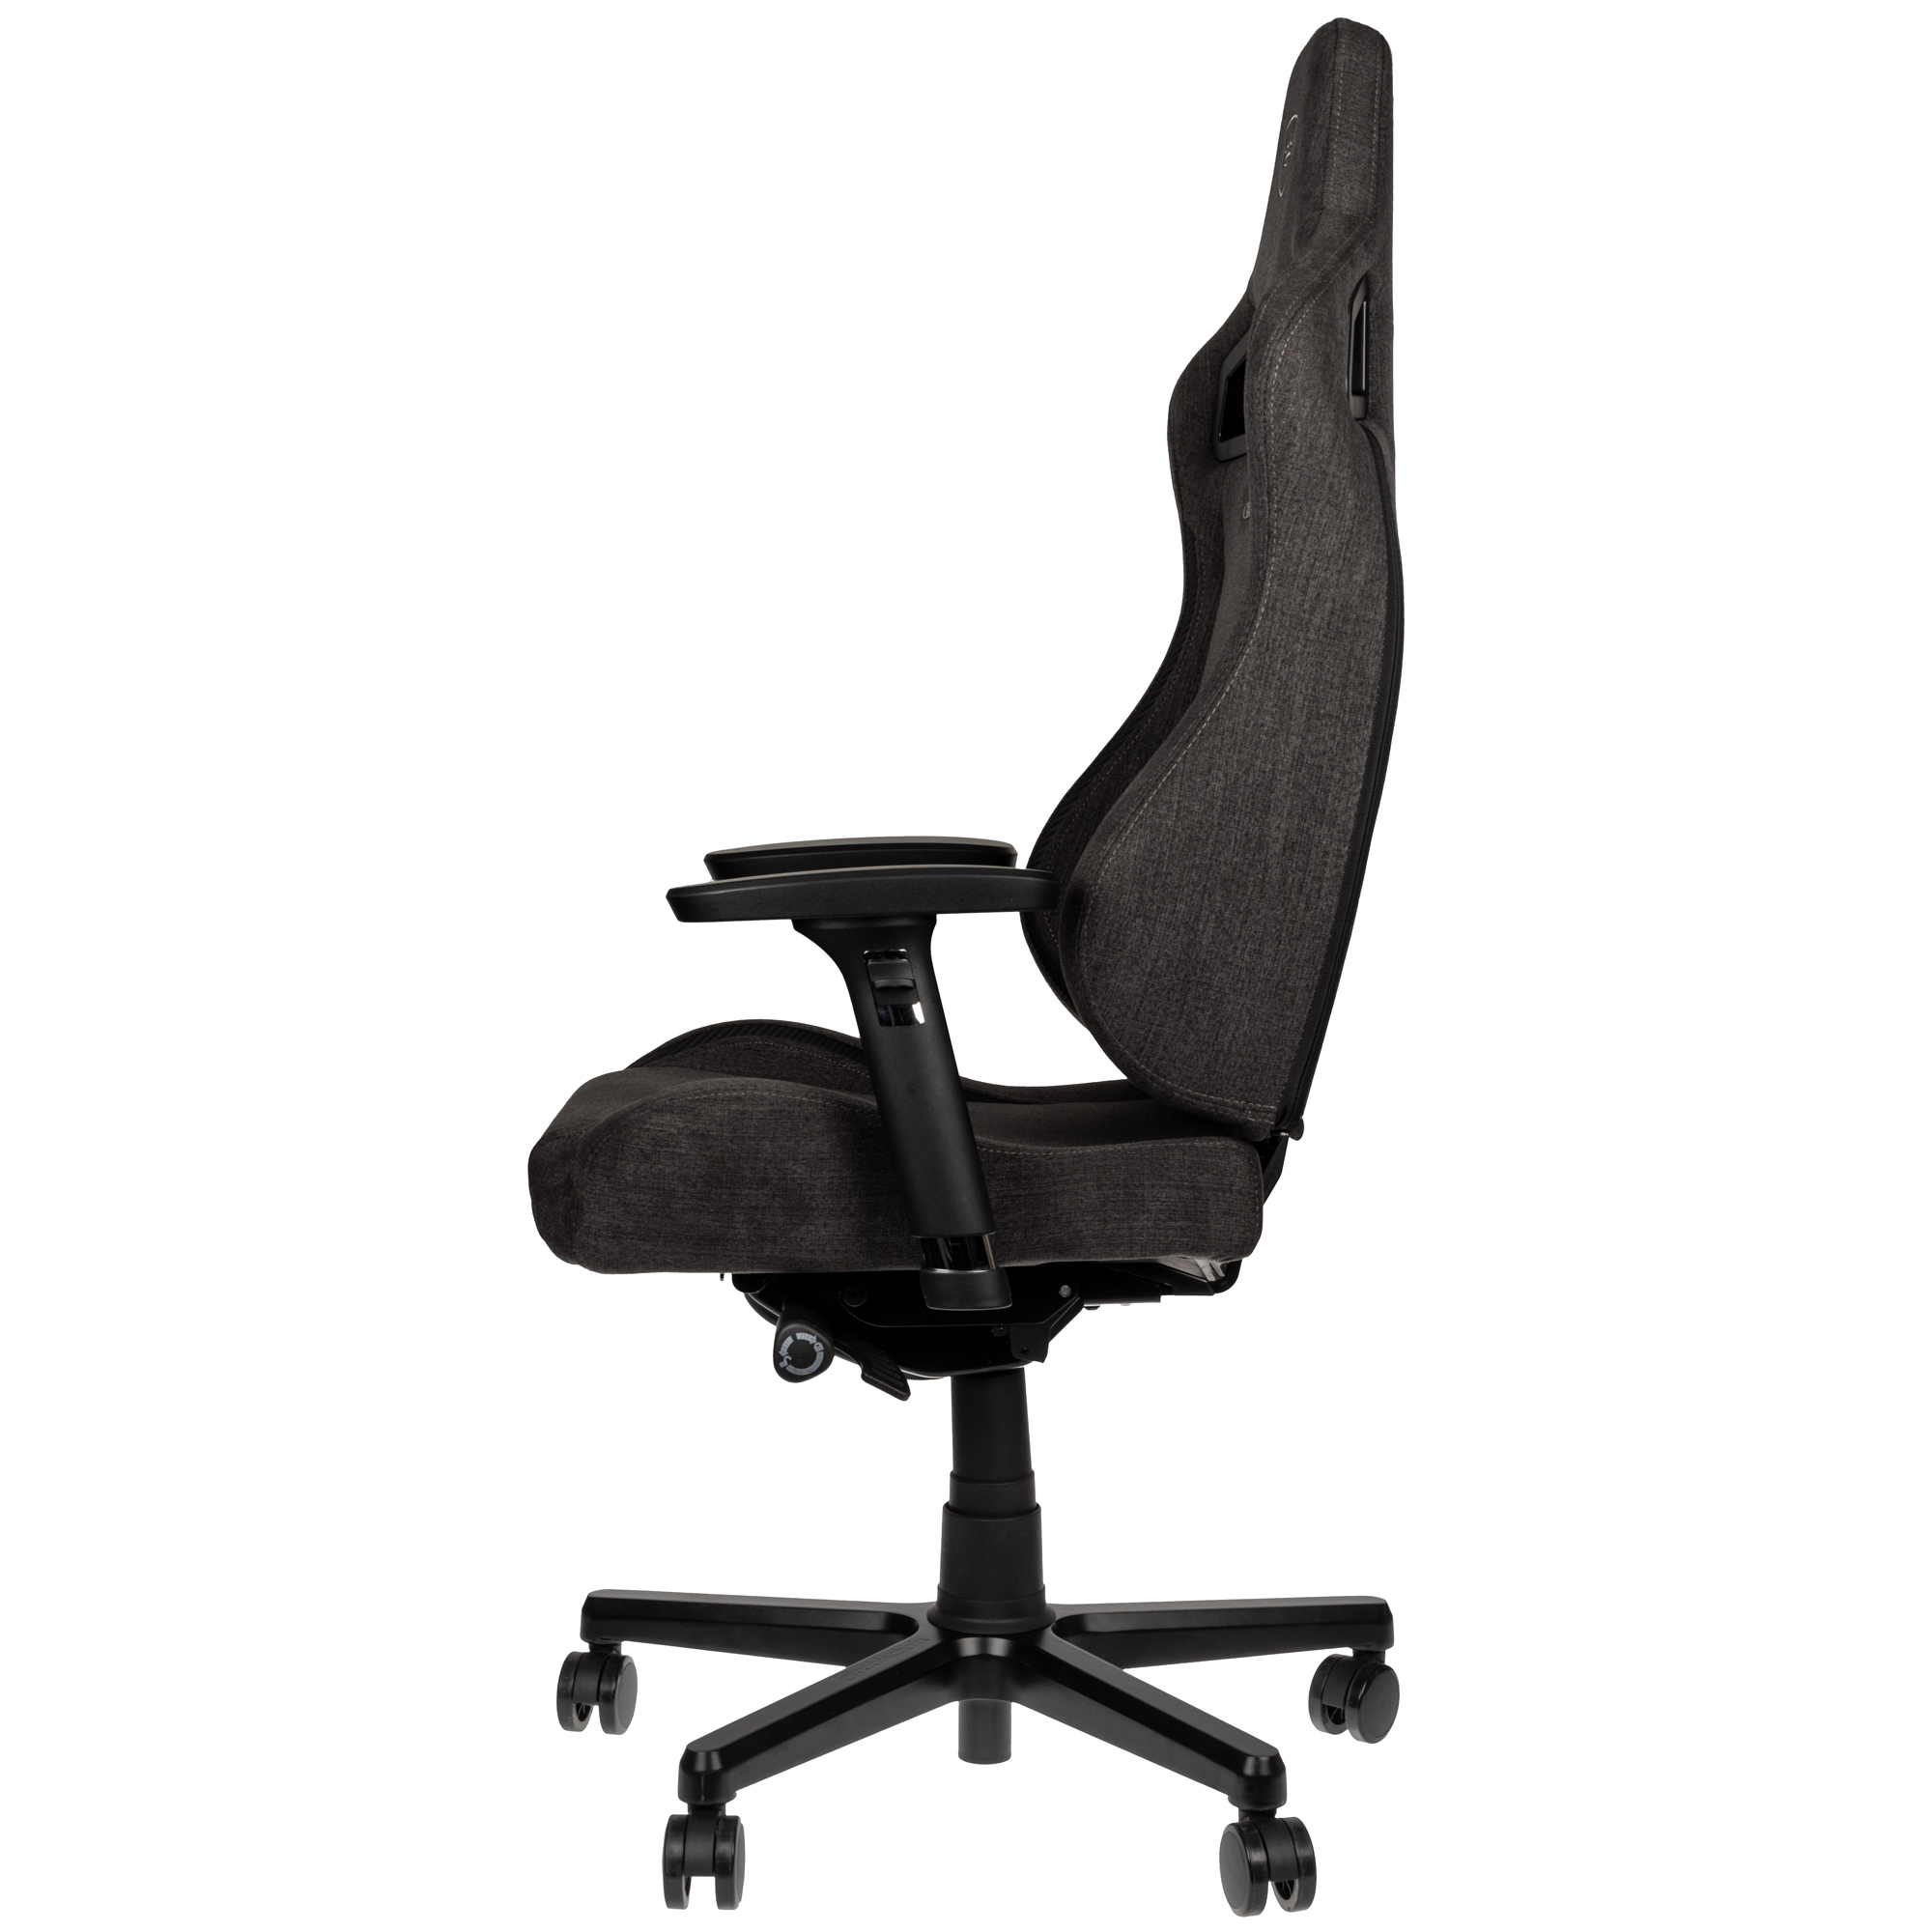 noblechairs EPIC Compact TX Gaming Chair - anthrazit/carbon